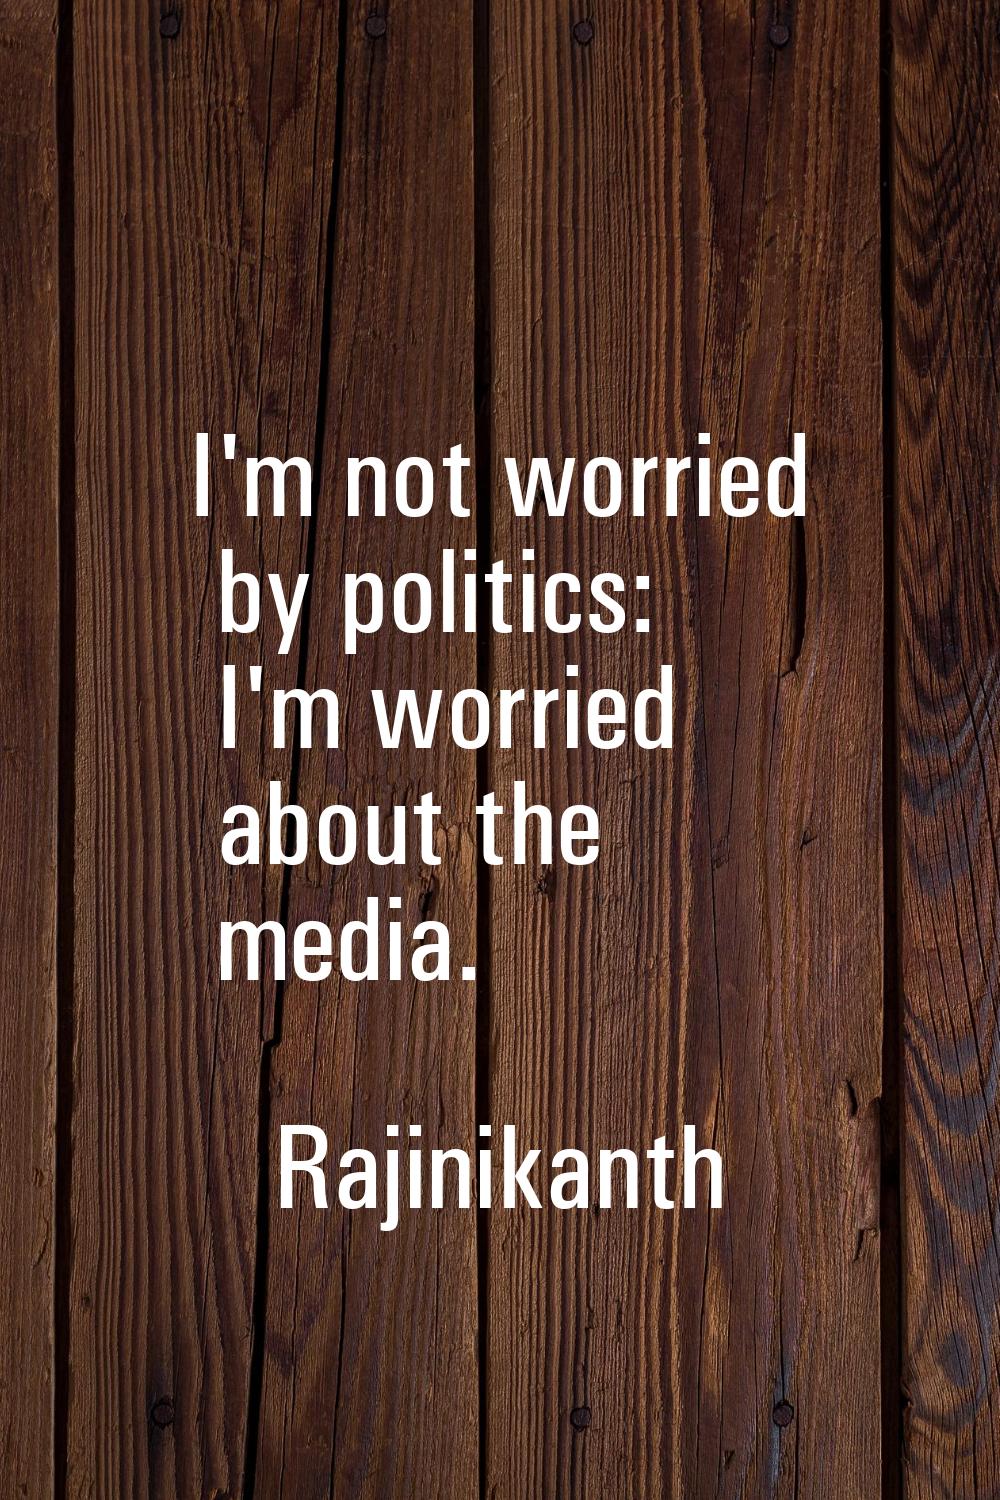 I'm not worried by politics: I'm worried about the media.